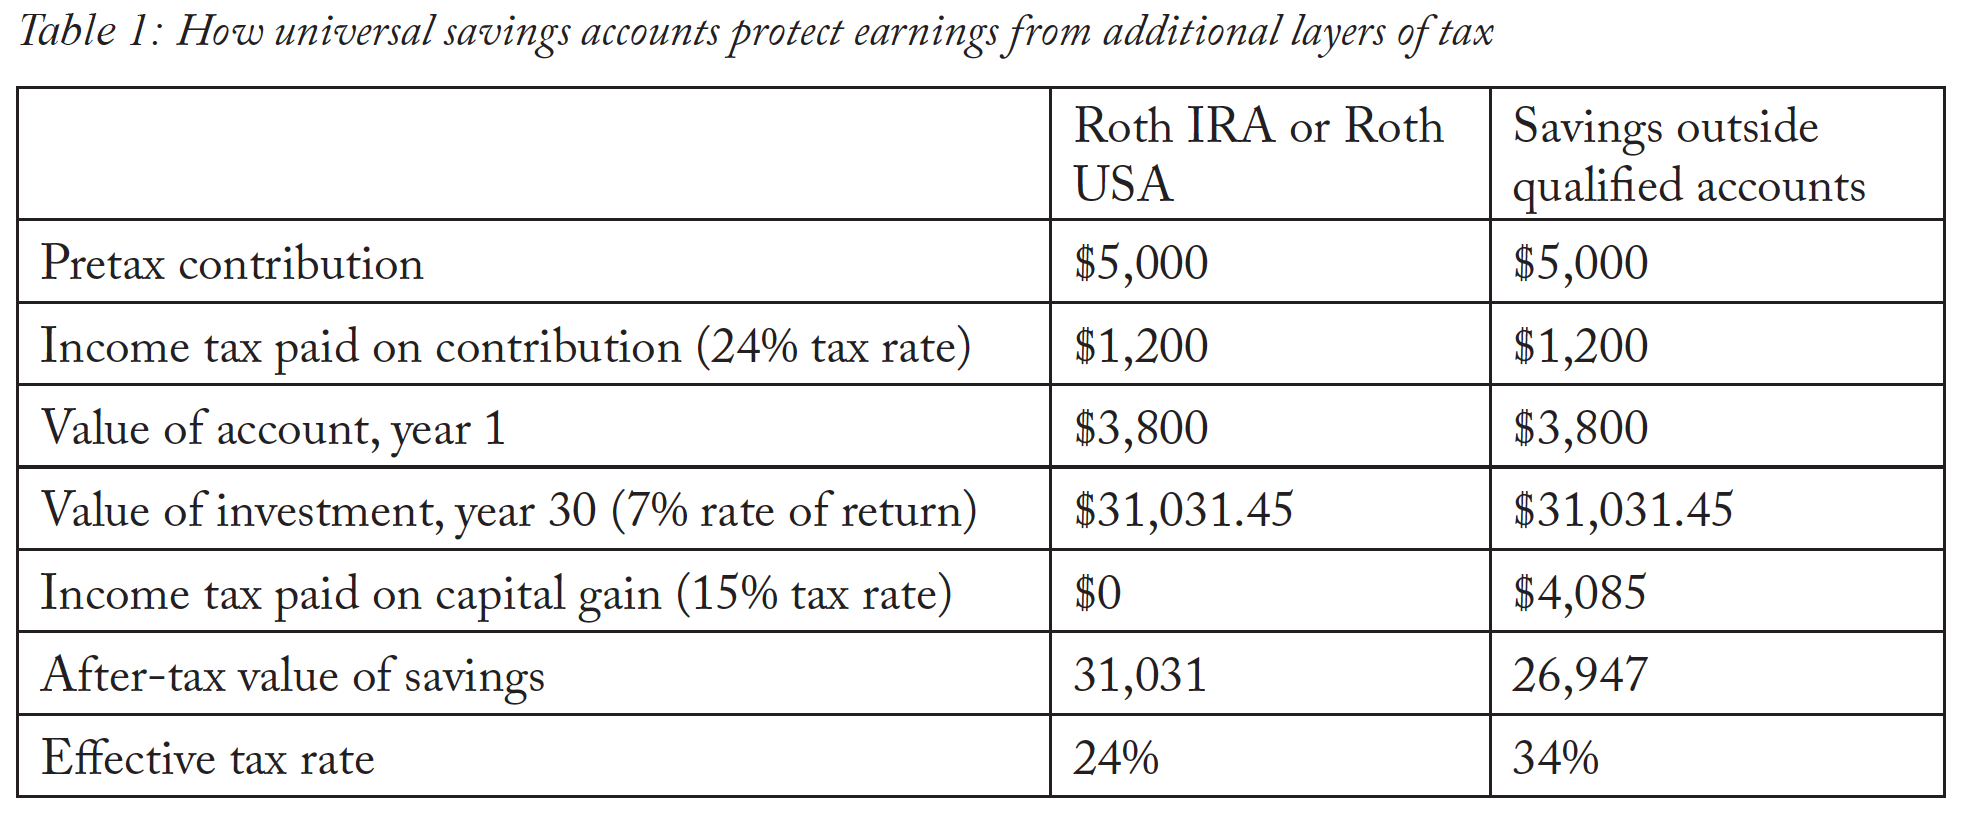 Table 1: How universal savings accounts protect earnings from additional layers of tax